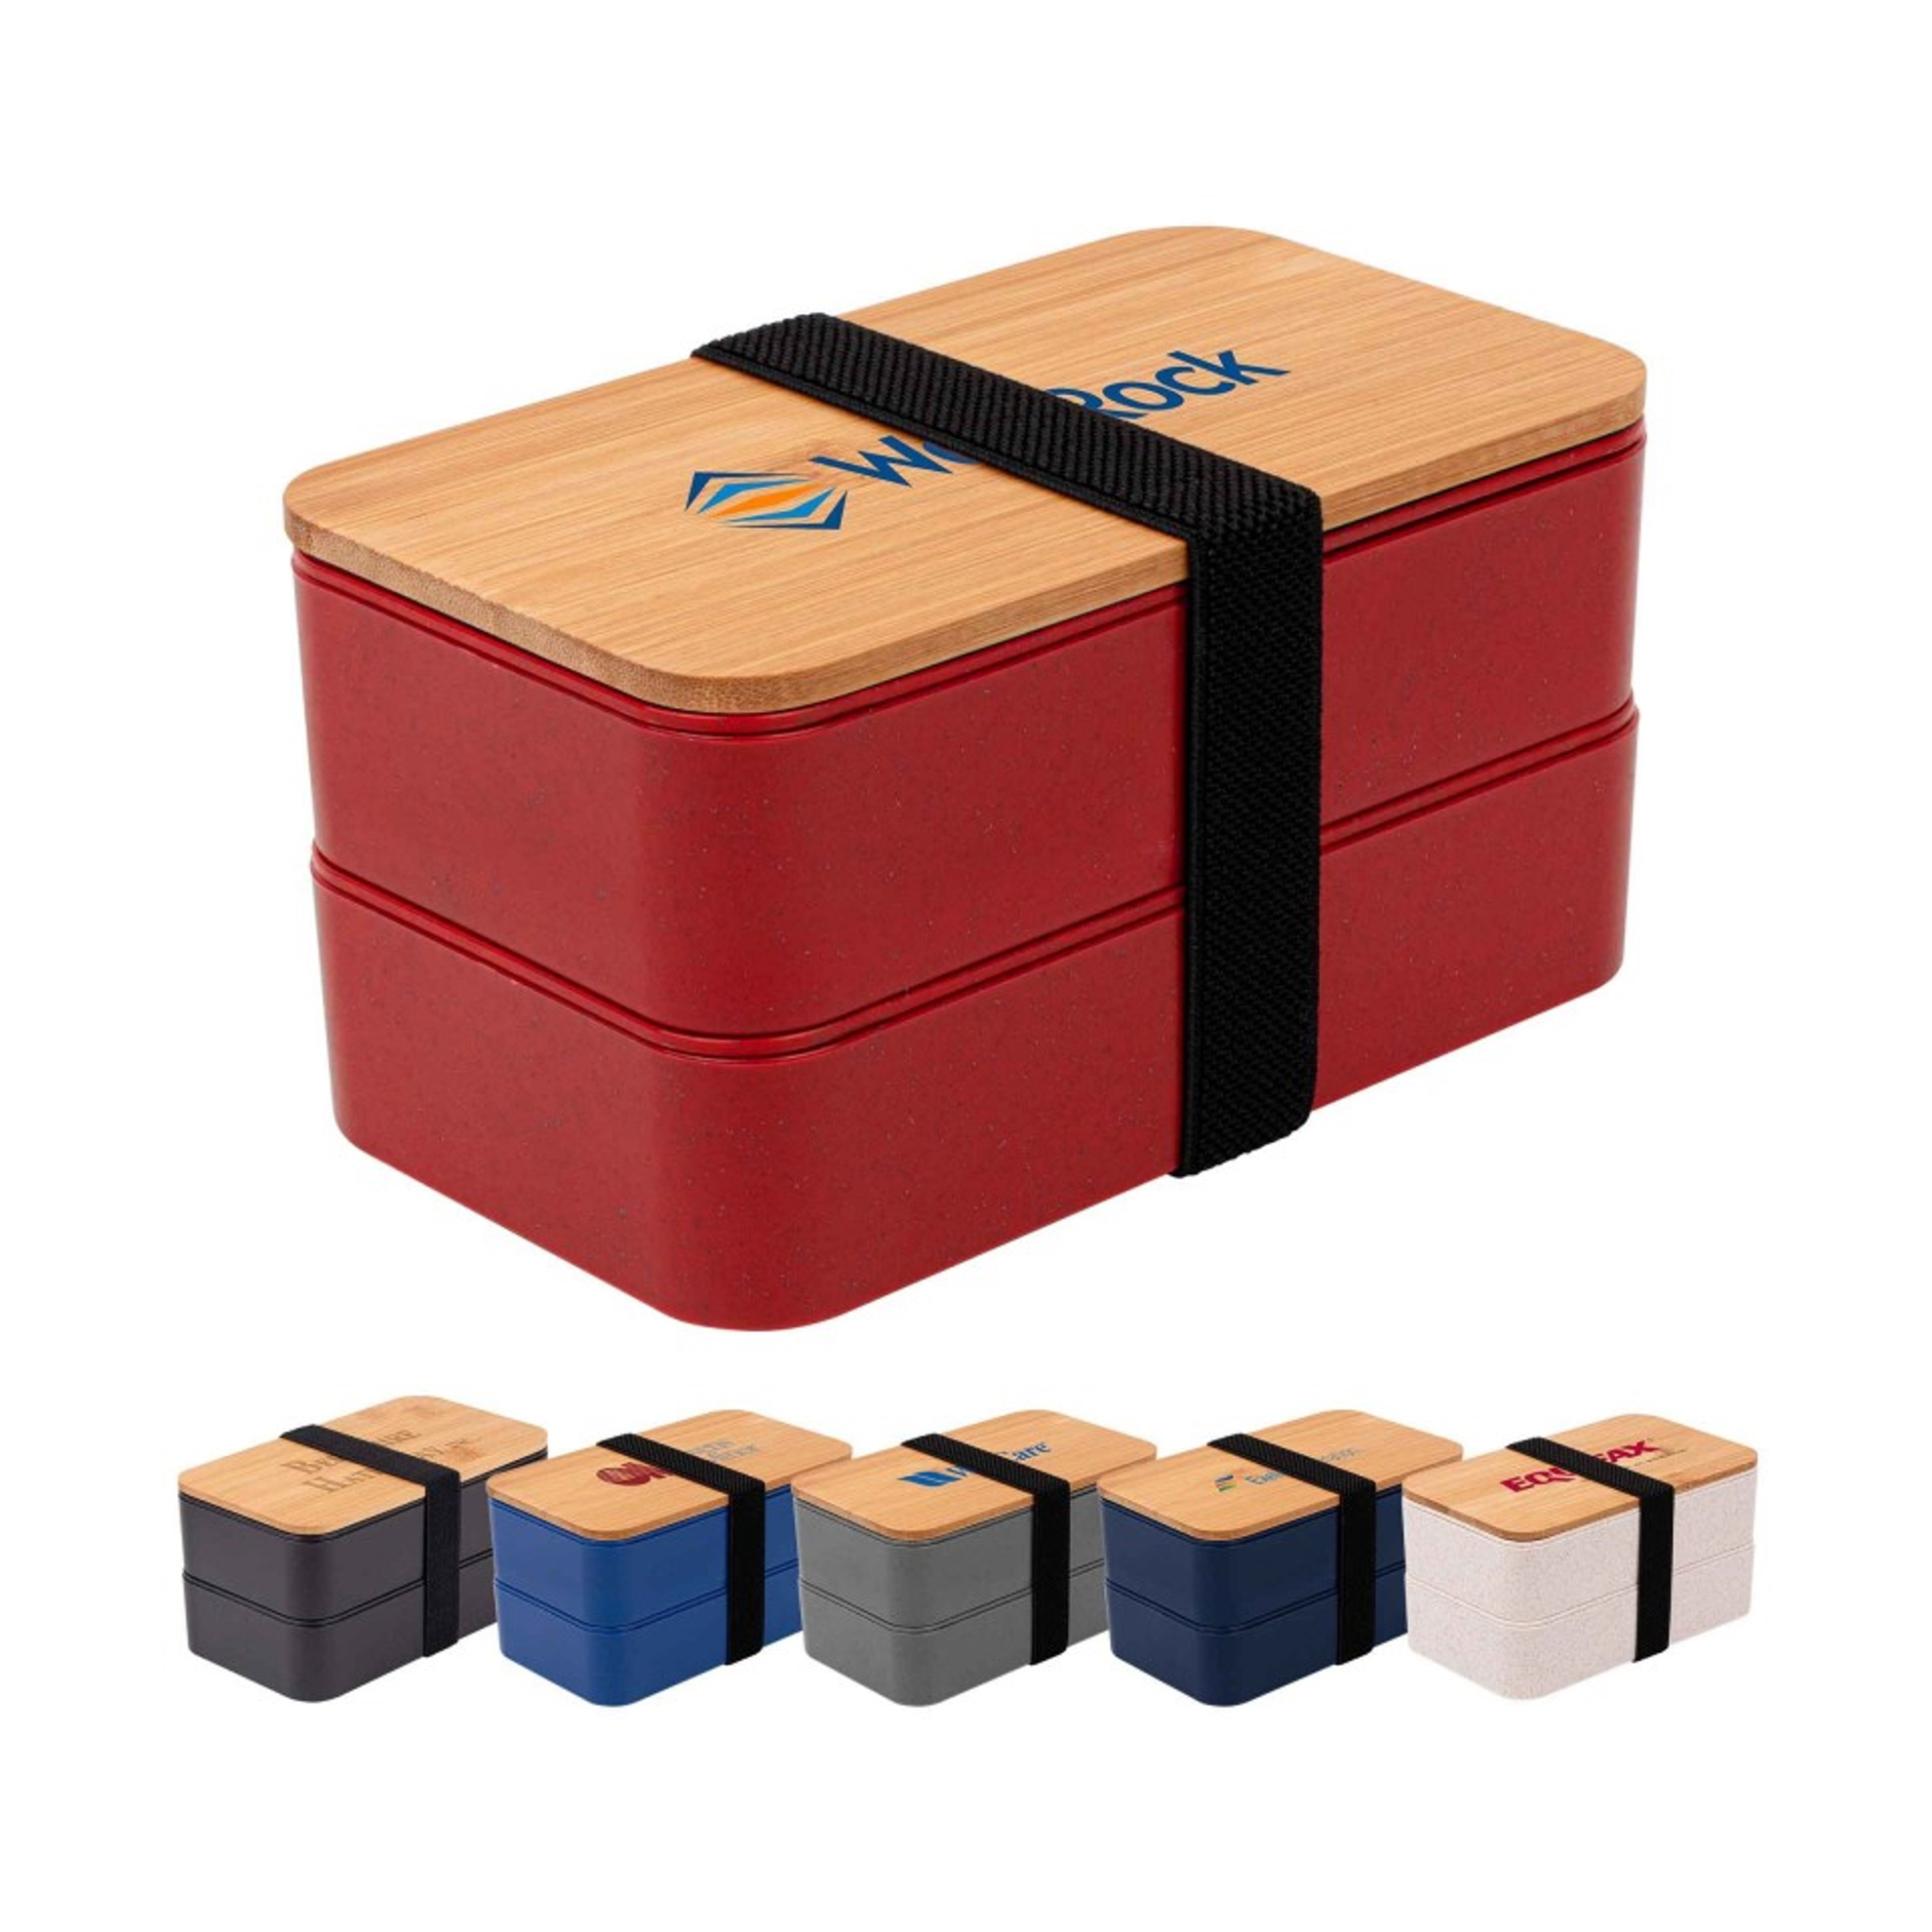 wheat straw bento lunch box set in different colors